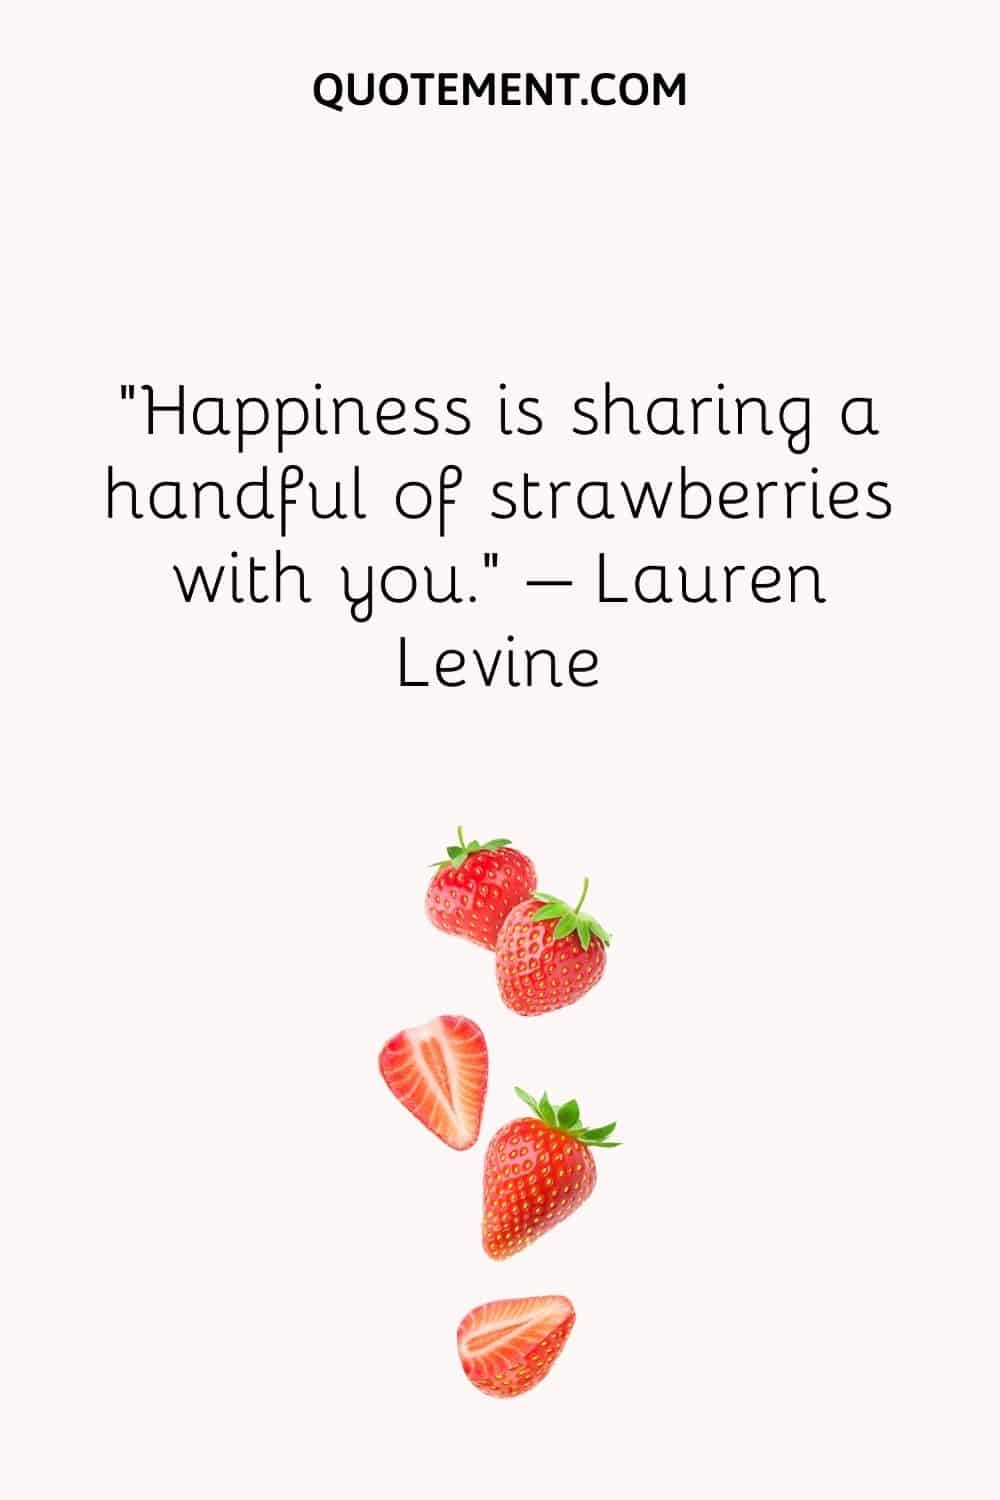 Happiness is sharing a handful of strawberries with you